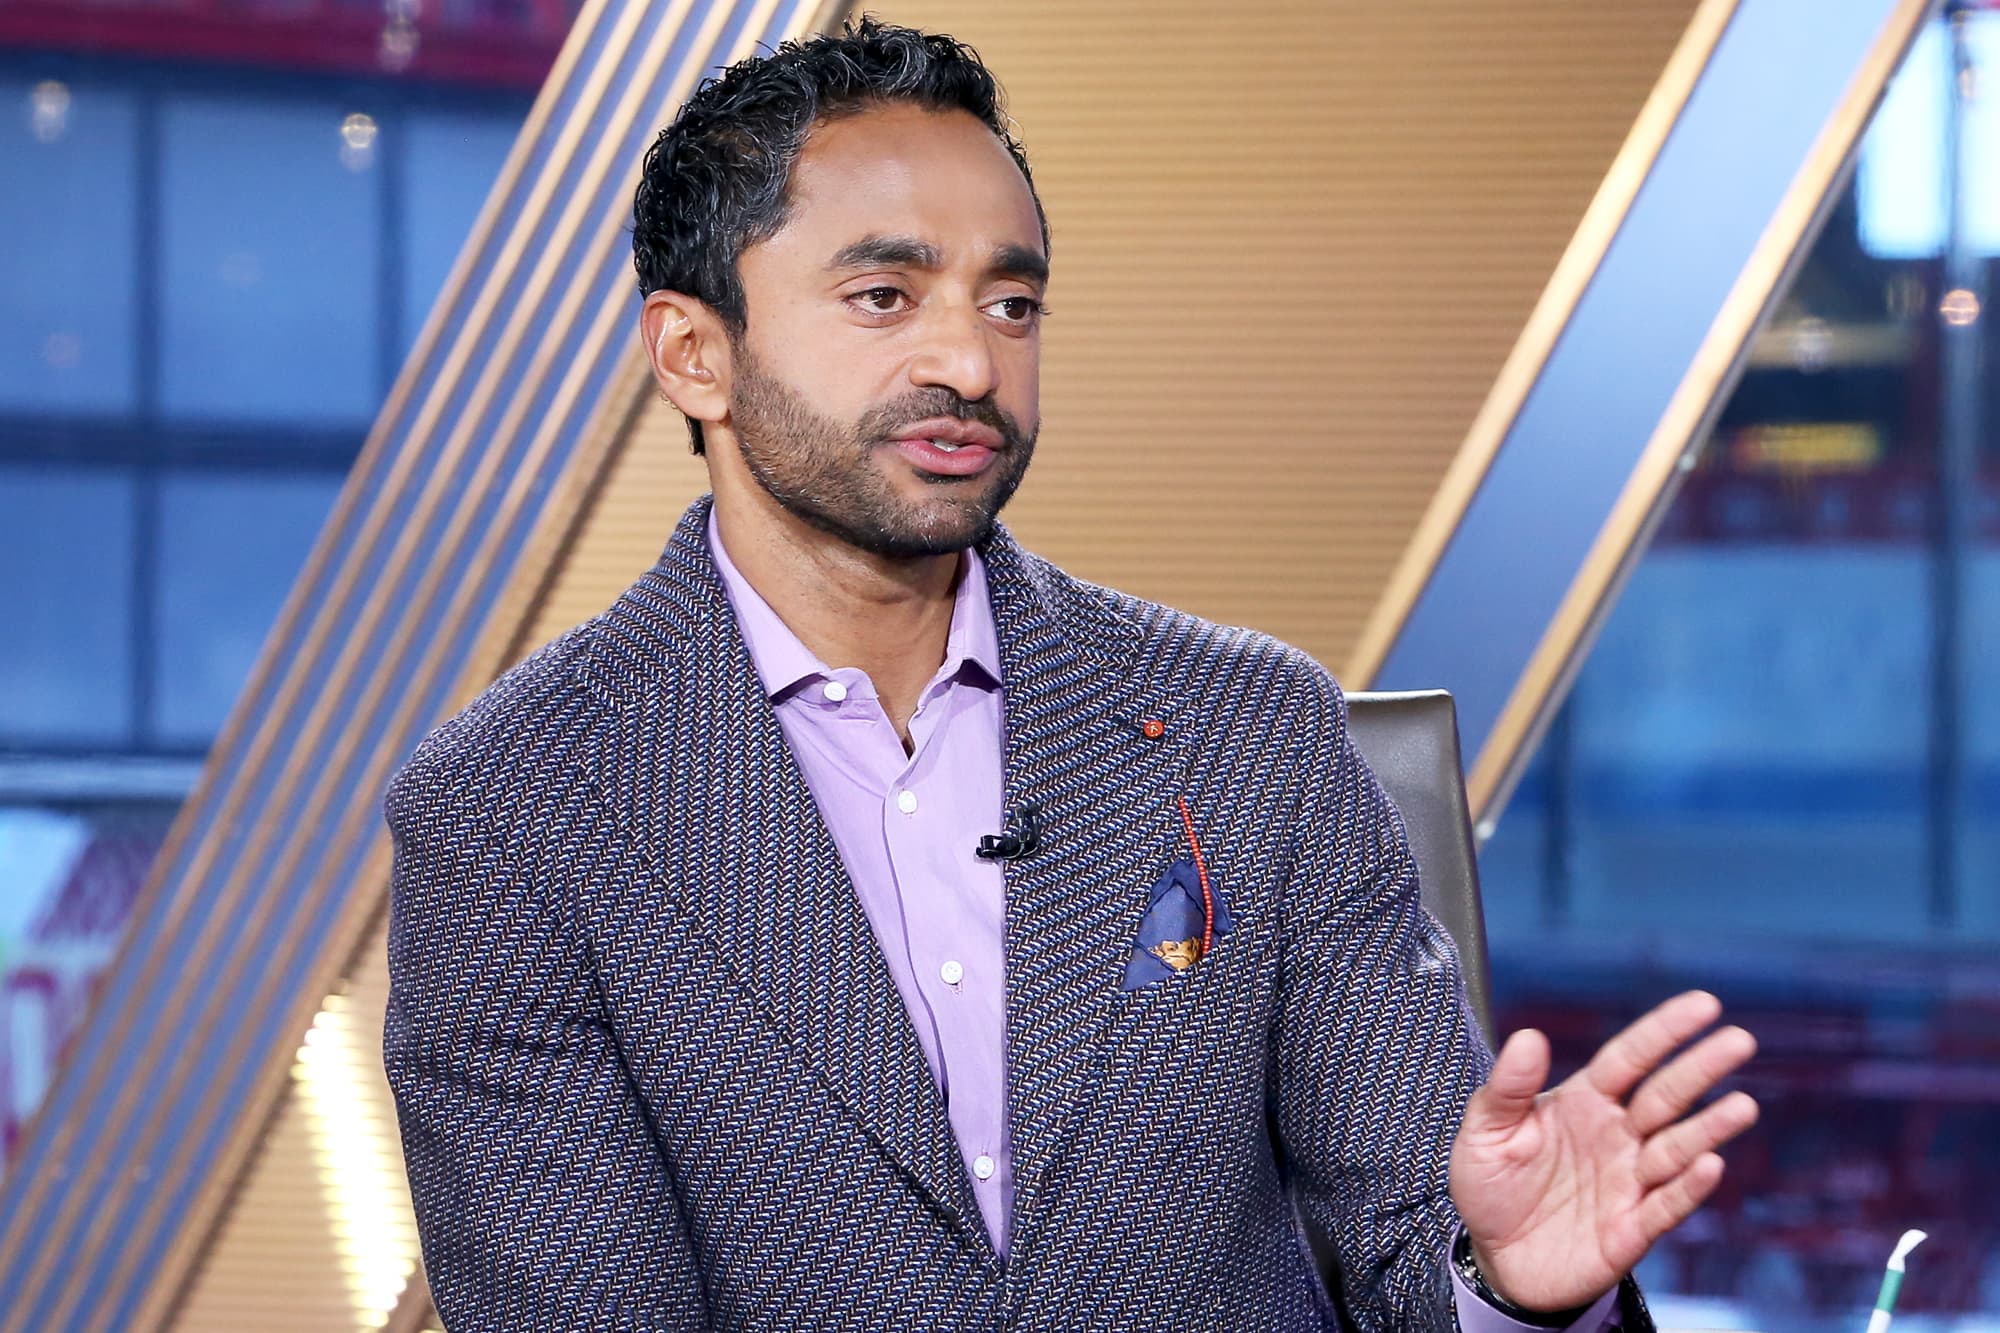 Clover Health, backed by Chamath Palihapitiya, receives notification of the SEC investigation